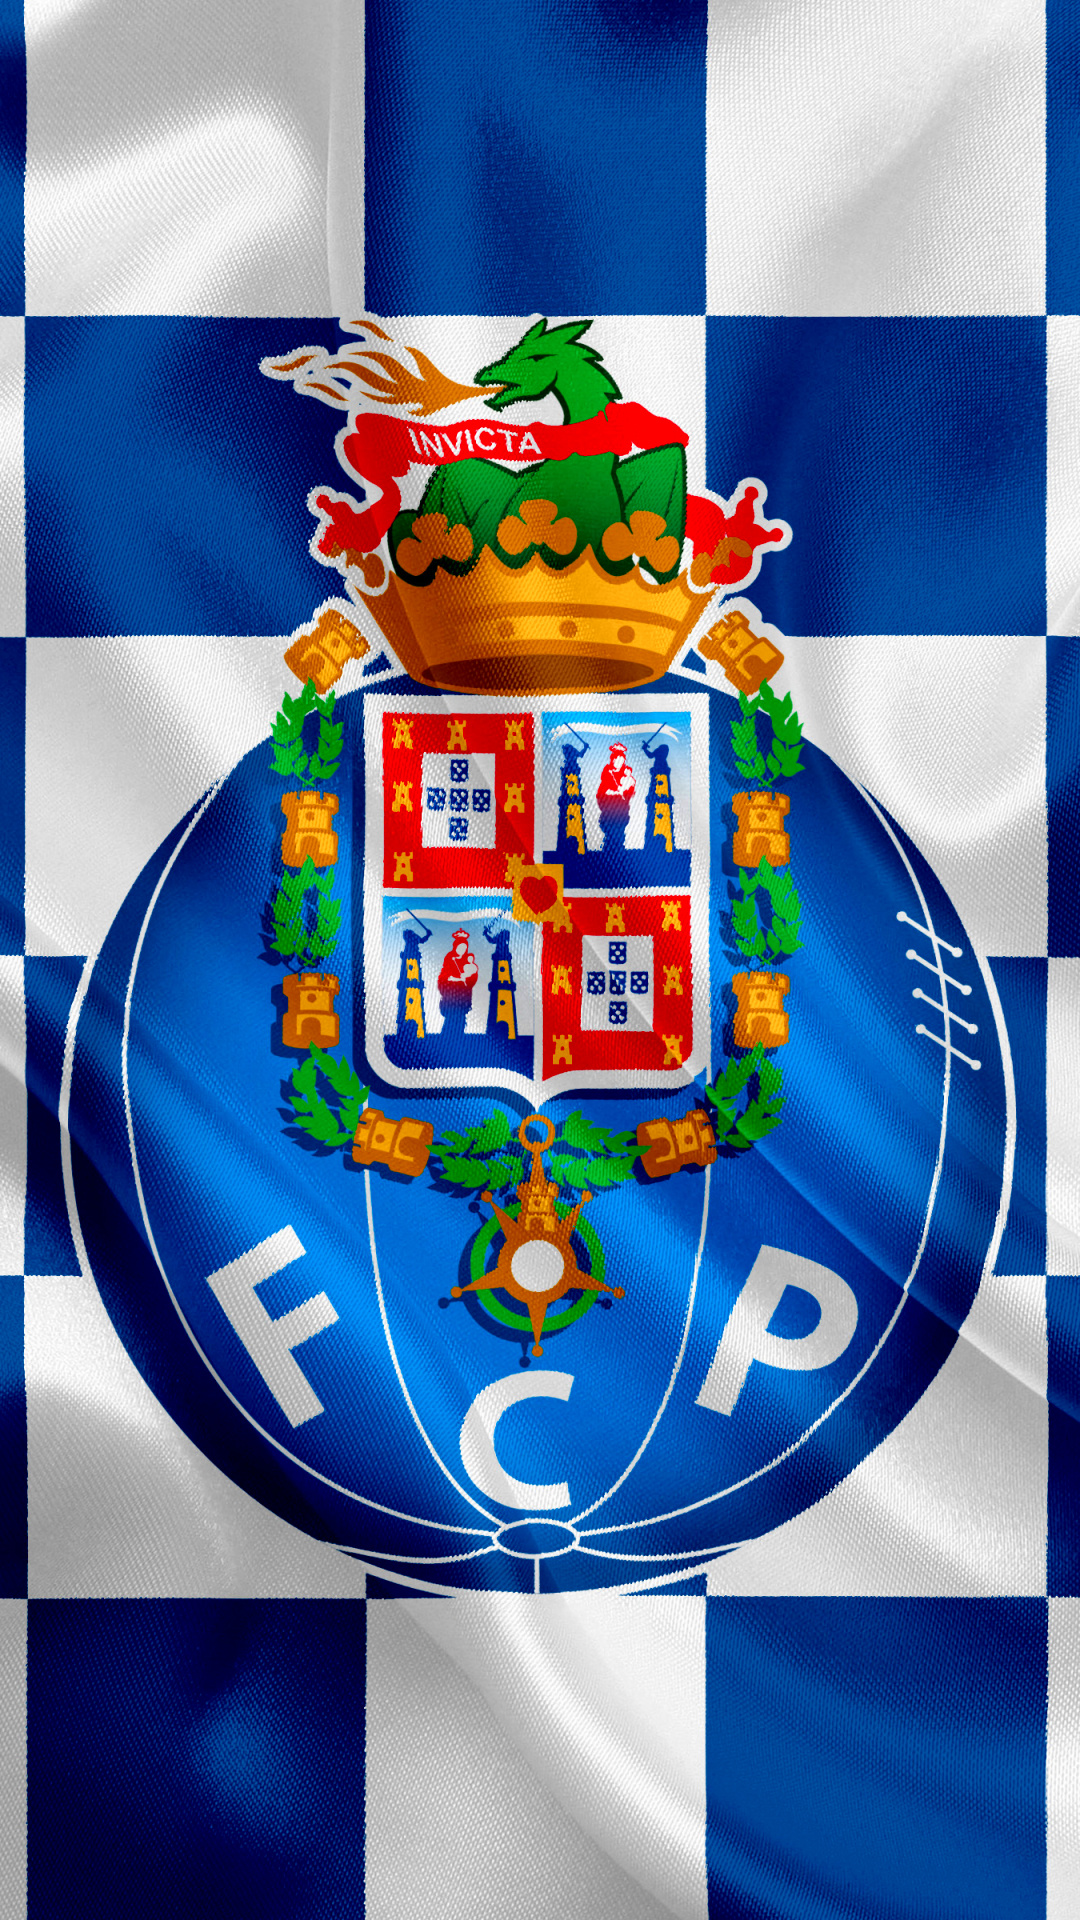 FC Porto: Ranks as one of the 20 best teams in Europe, based on results, according to European soccer's governing body UEFA. 1080x1920 Full HD Background.